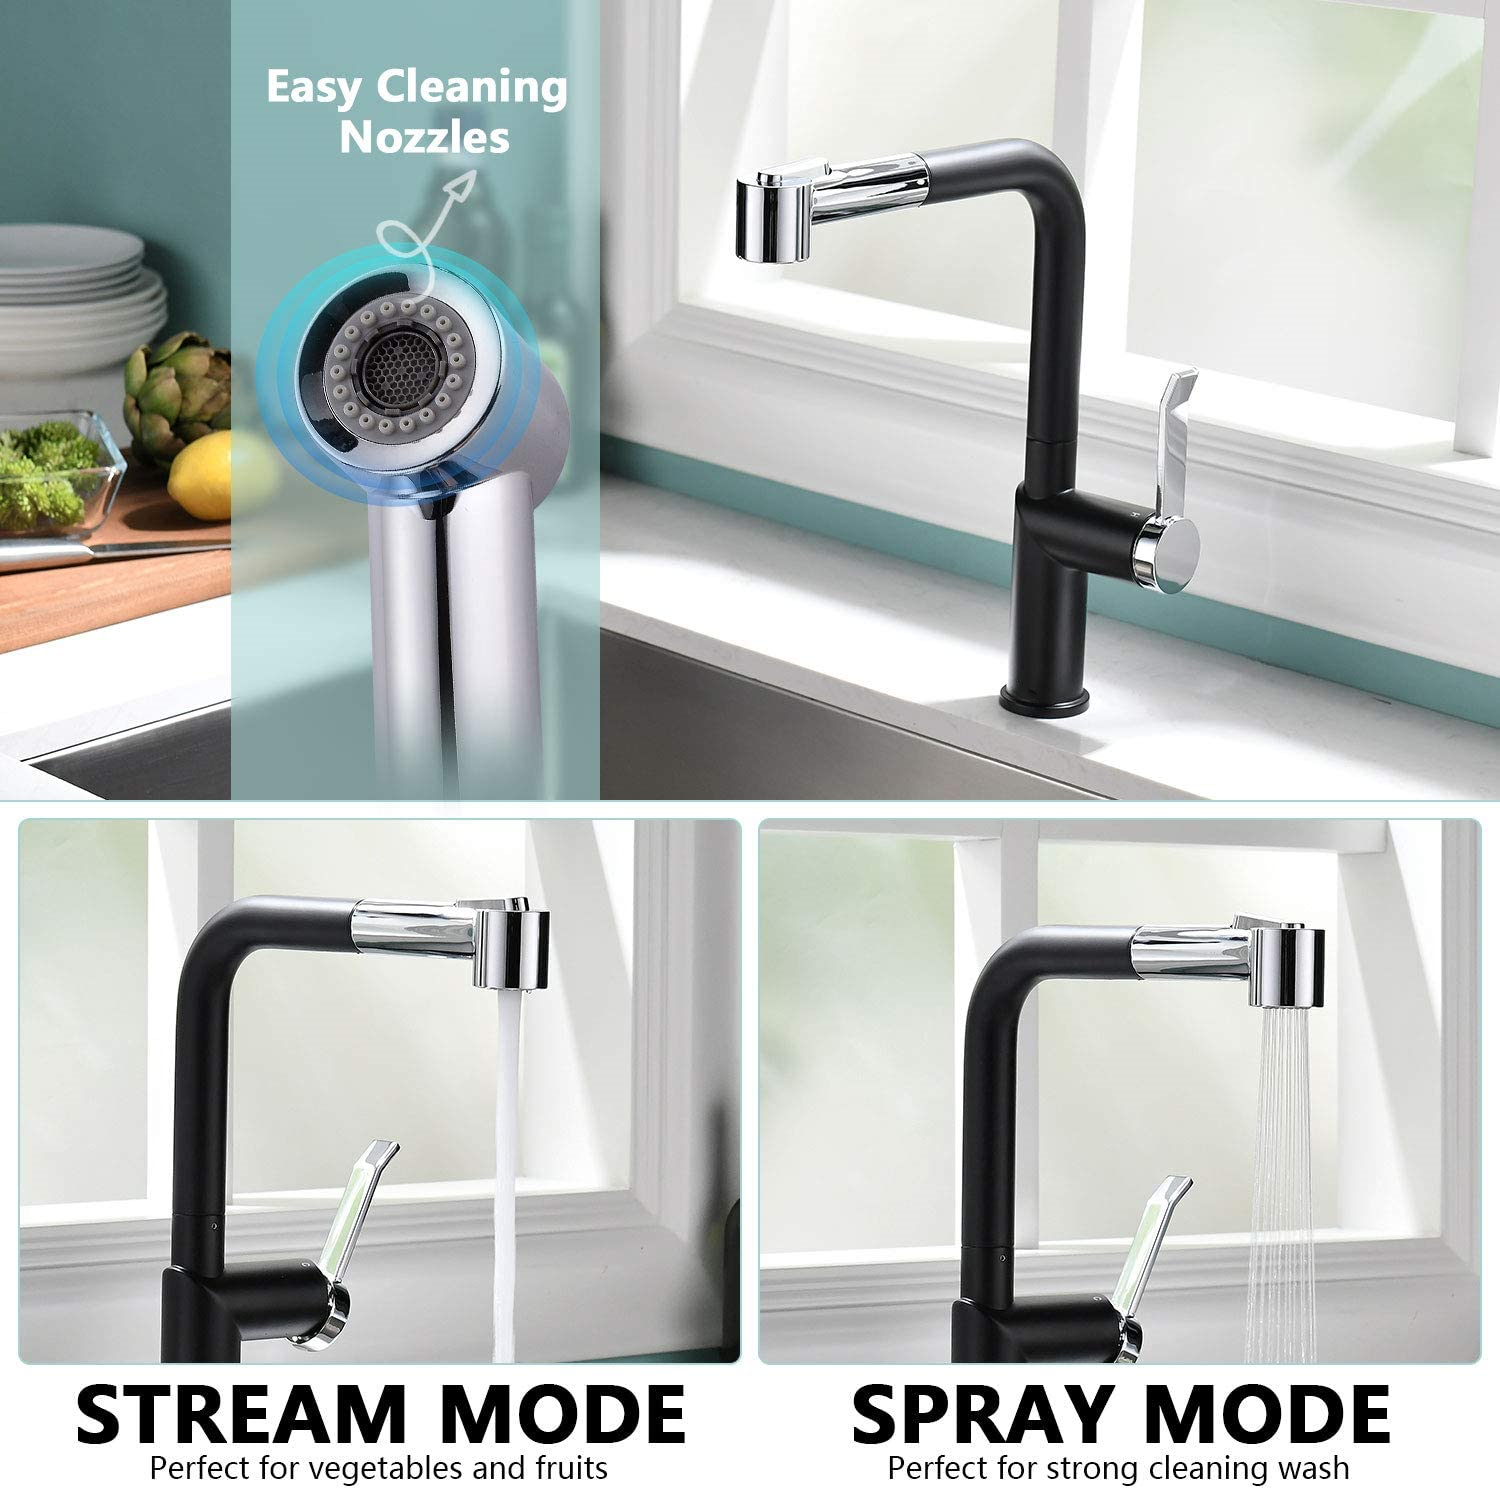 New Style China Factory 2 Function 120 Degree Swivel Pull Down Water Faucet Sink Mixer Taps